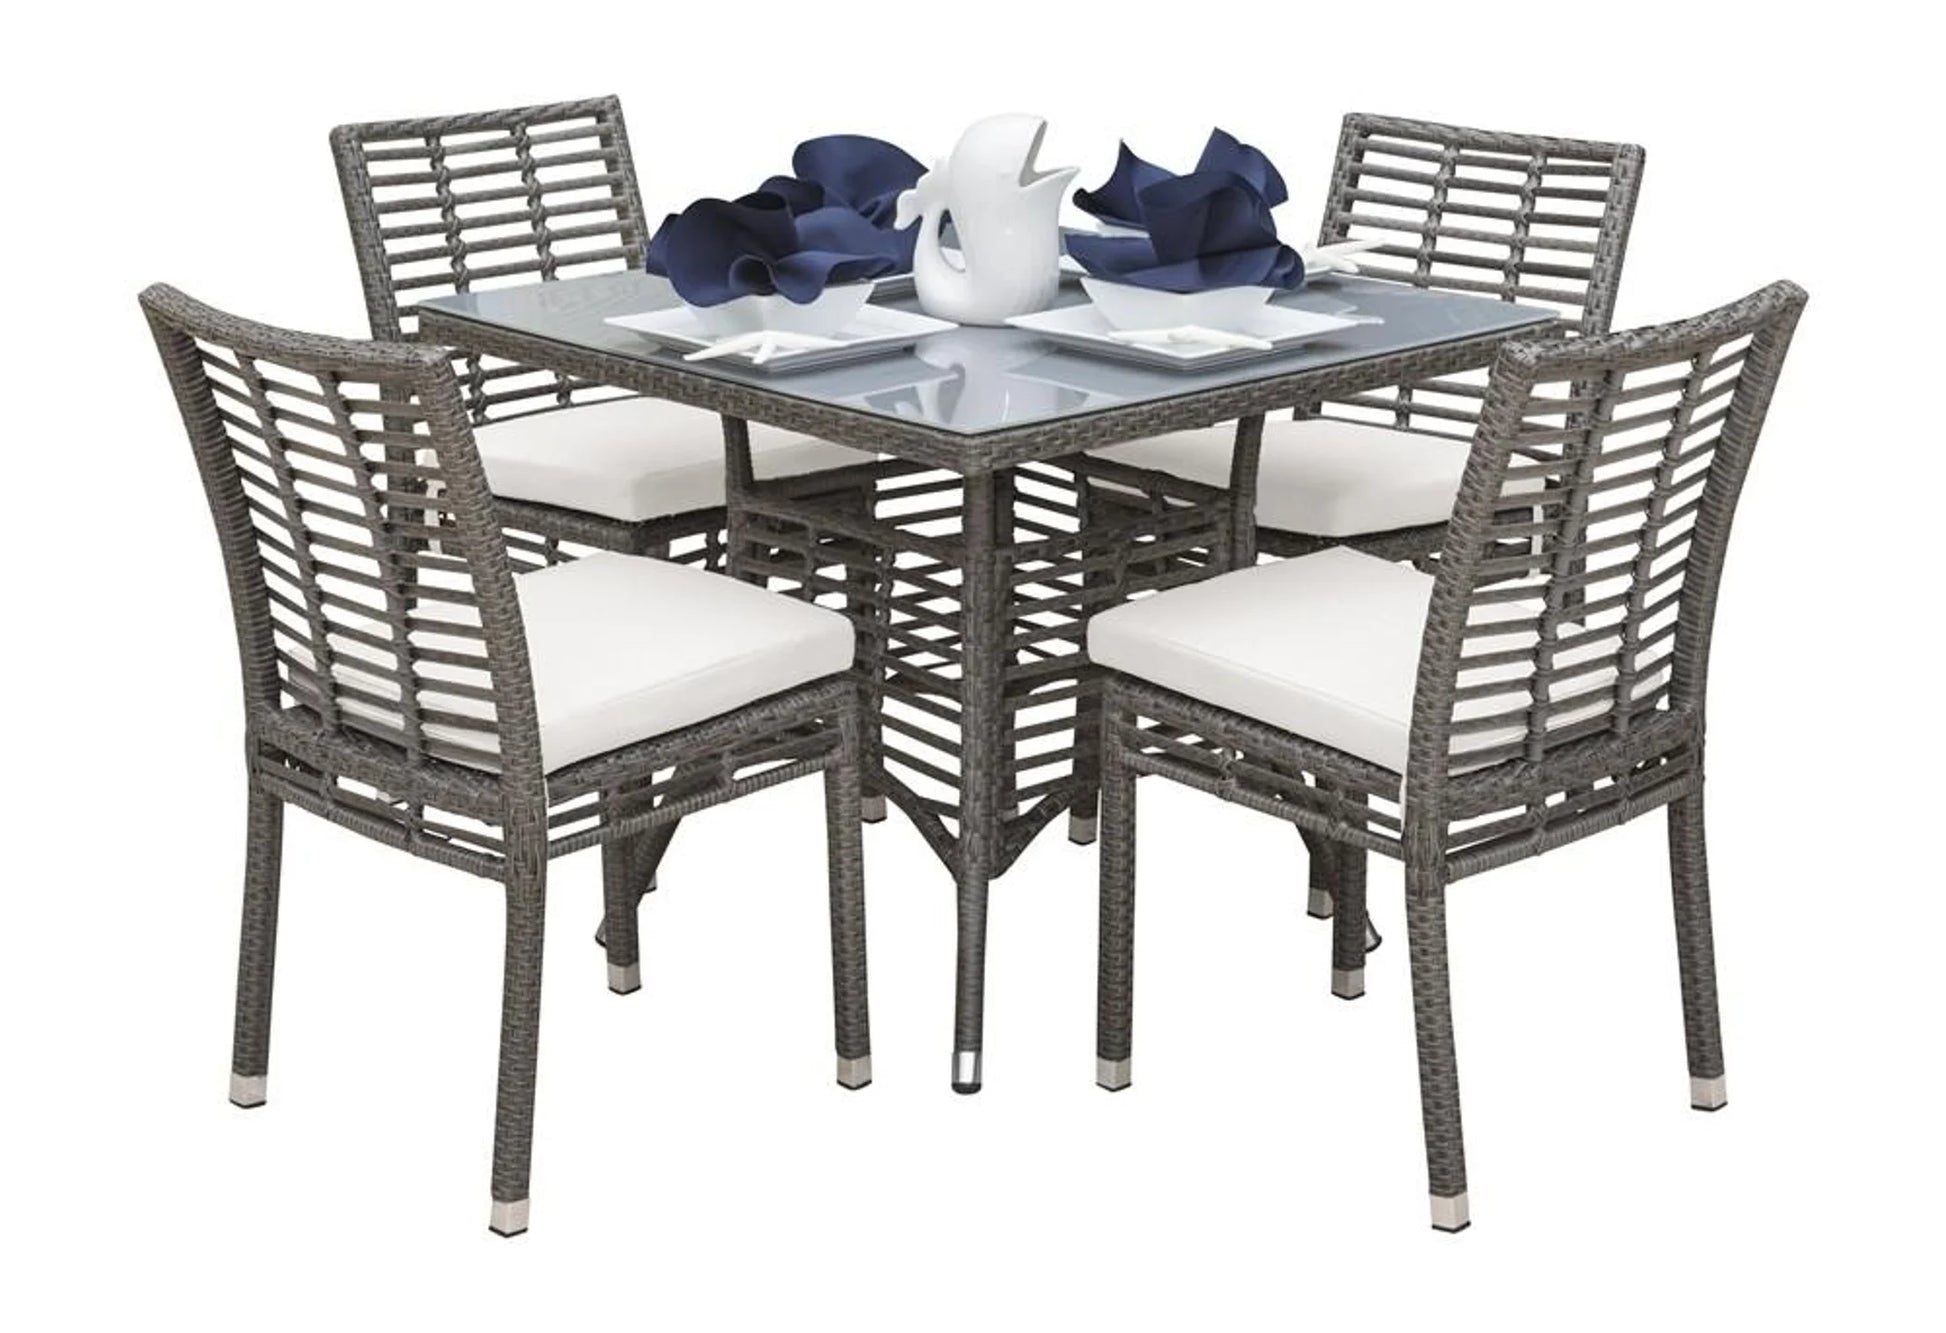 Patio Furniture Outdoor Dining Panama Jack Graphite Collection 5 Piece Side Chair Dining Set PJO-1601-GRY-5DA